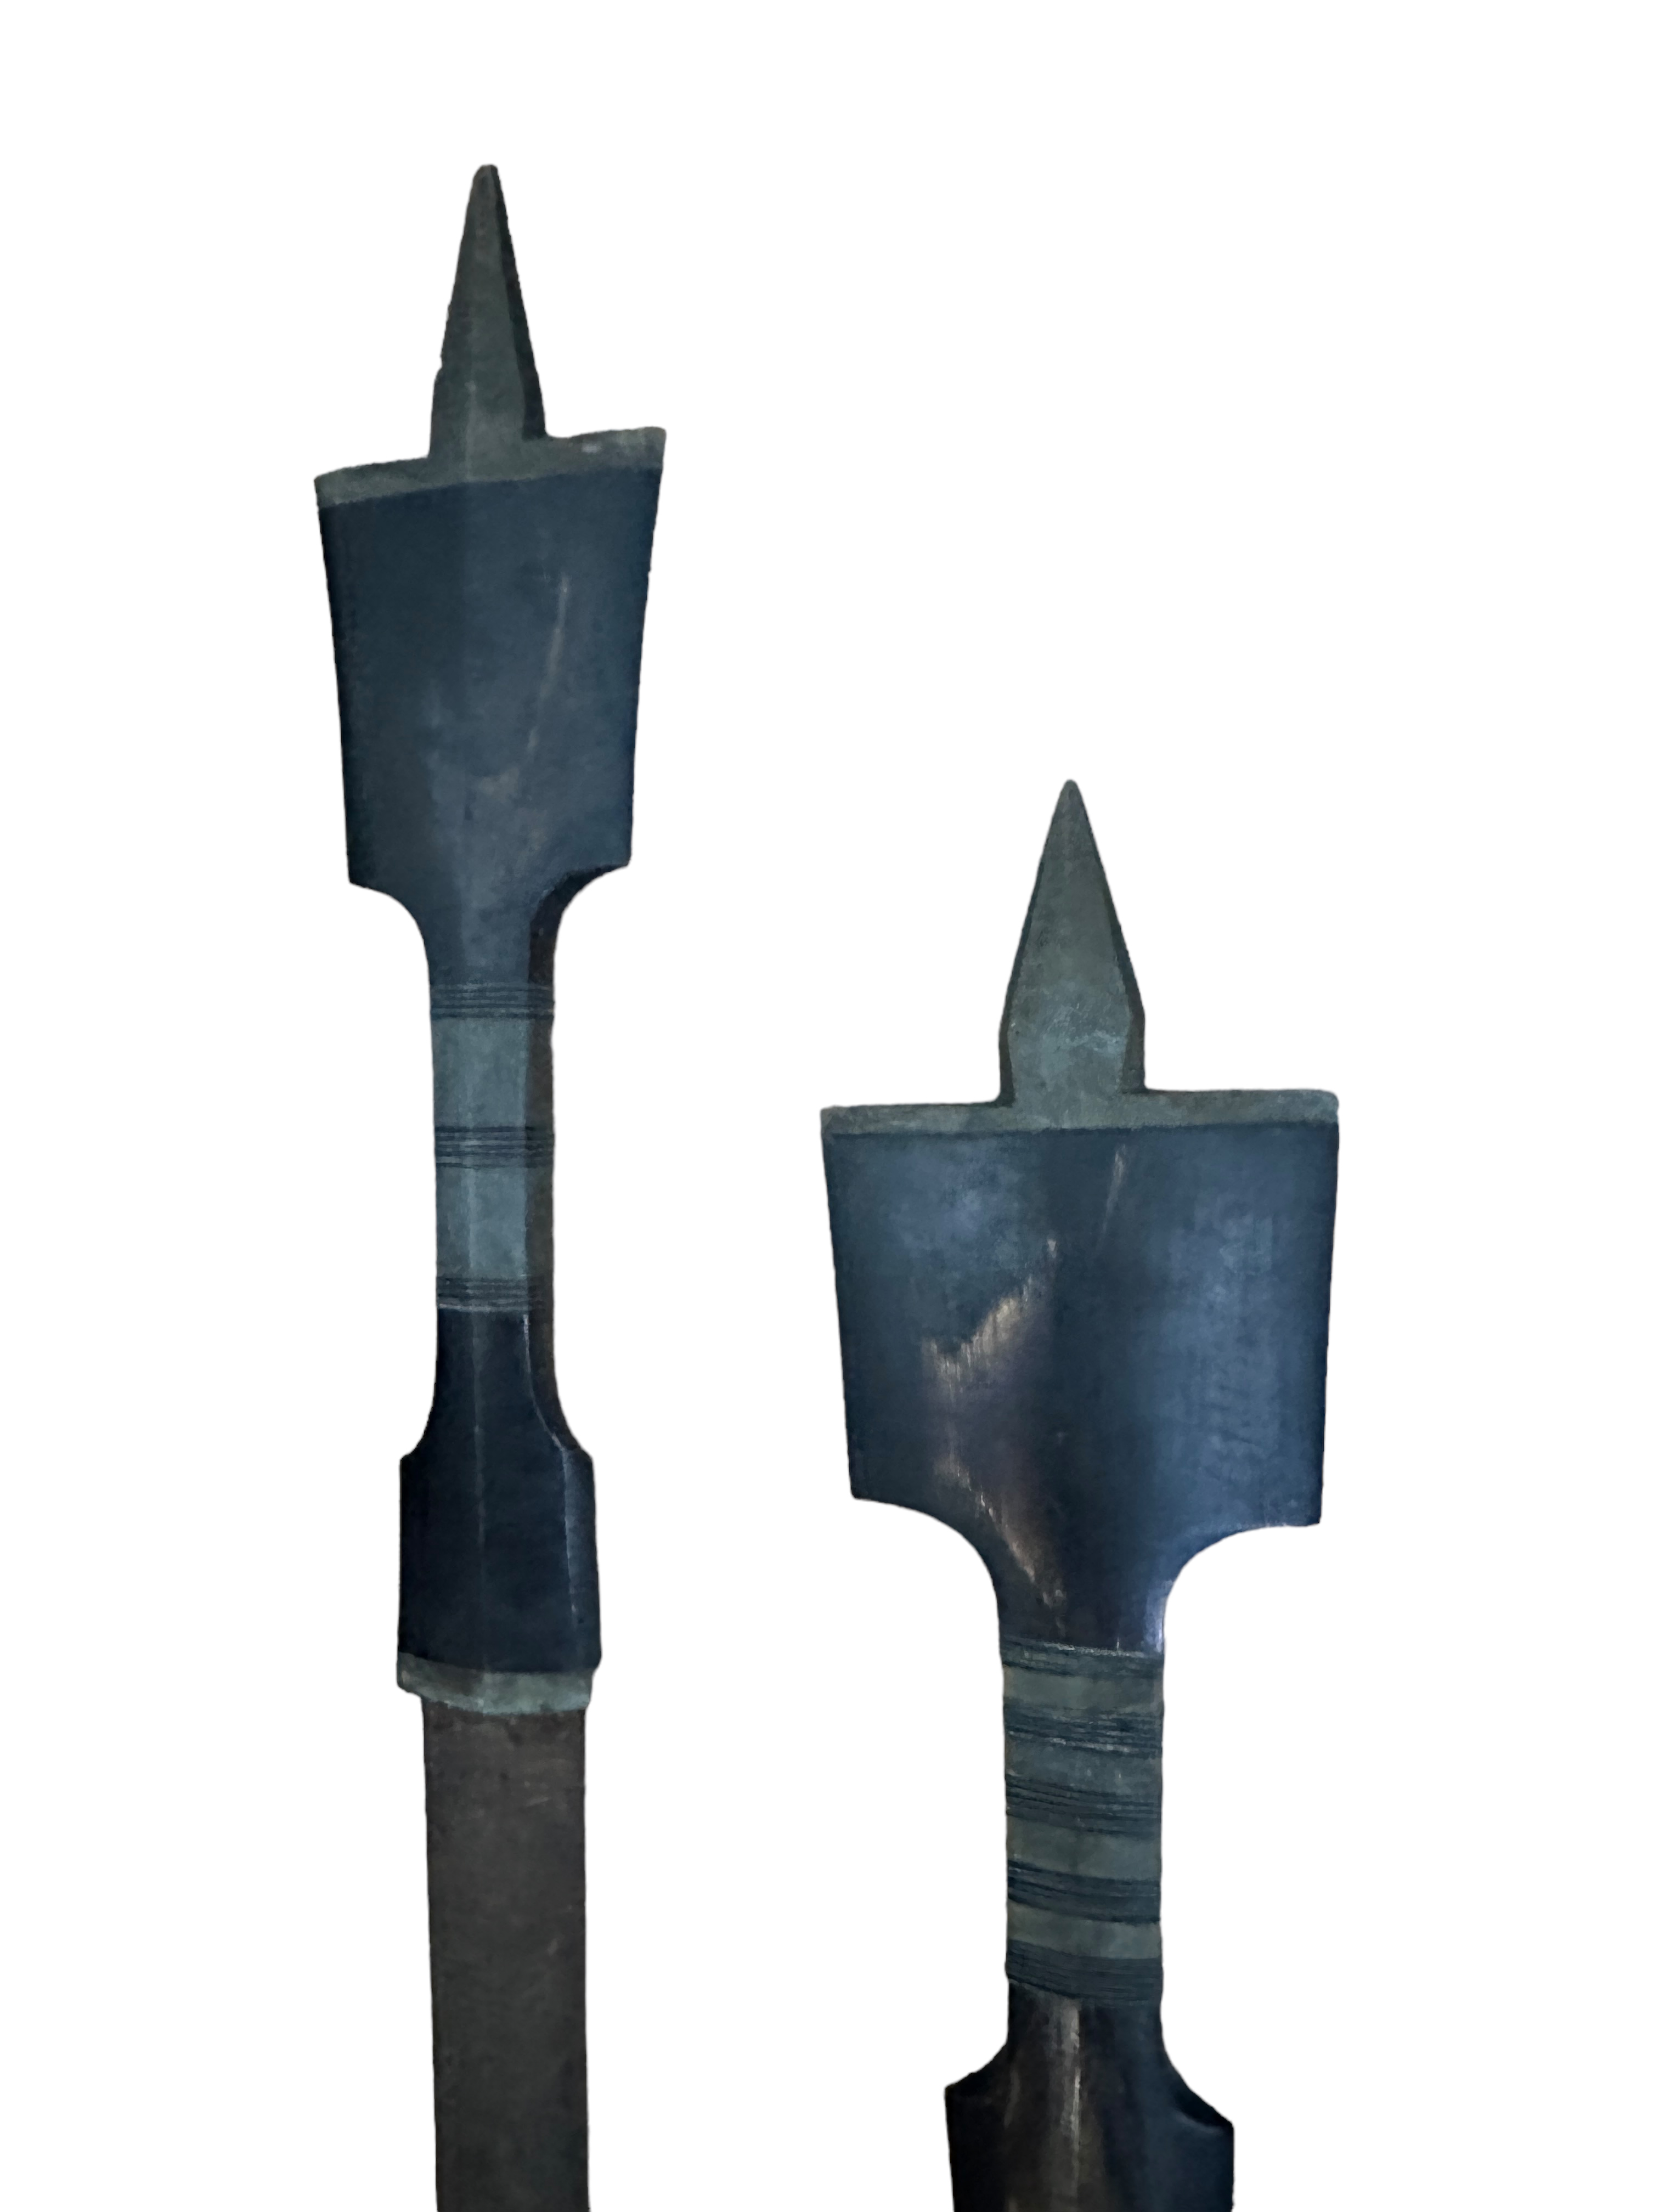 Duo of African Swords 74cm and 63cm and duo of Hide Covered Spears - 86cm long. - Image 2 of 6